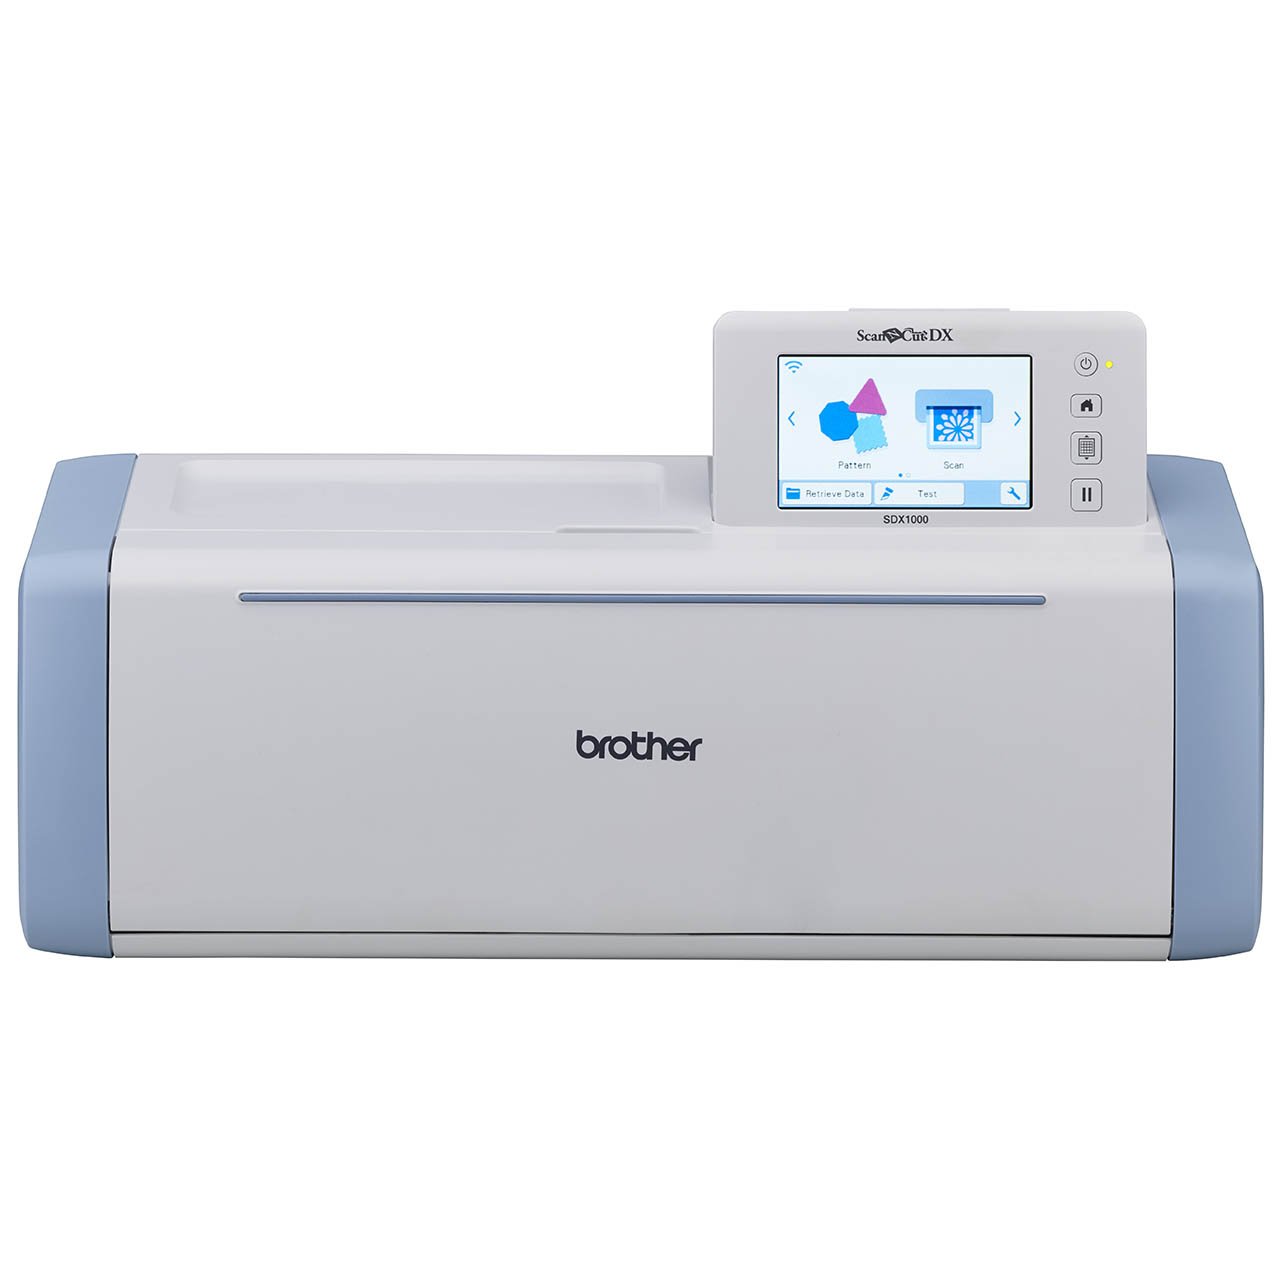 Brother SDX1000 ScanNCut Wireless Hobby Fabric & Paper Cutting Machine + 4 Year Warranty Offer!